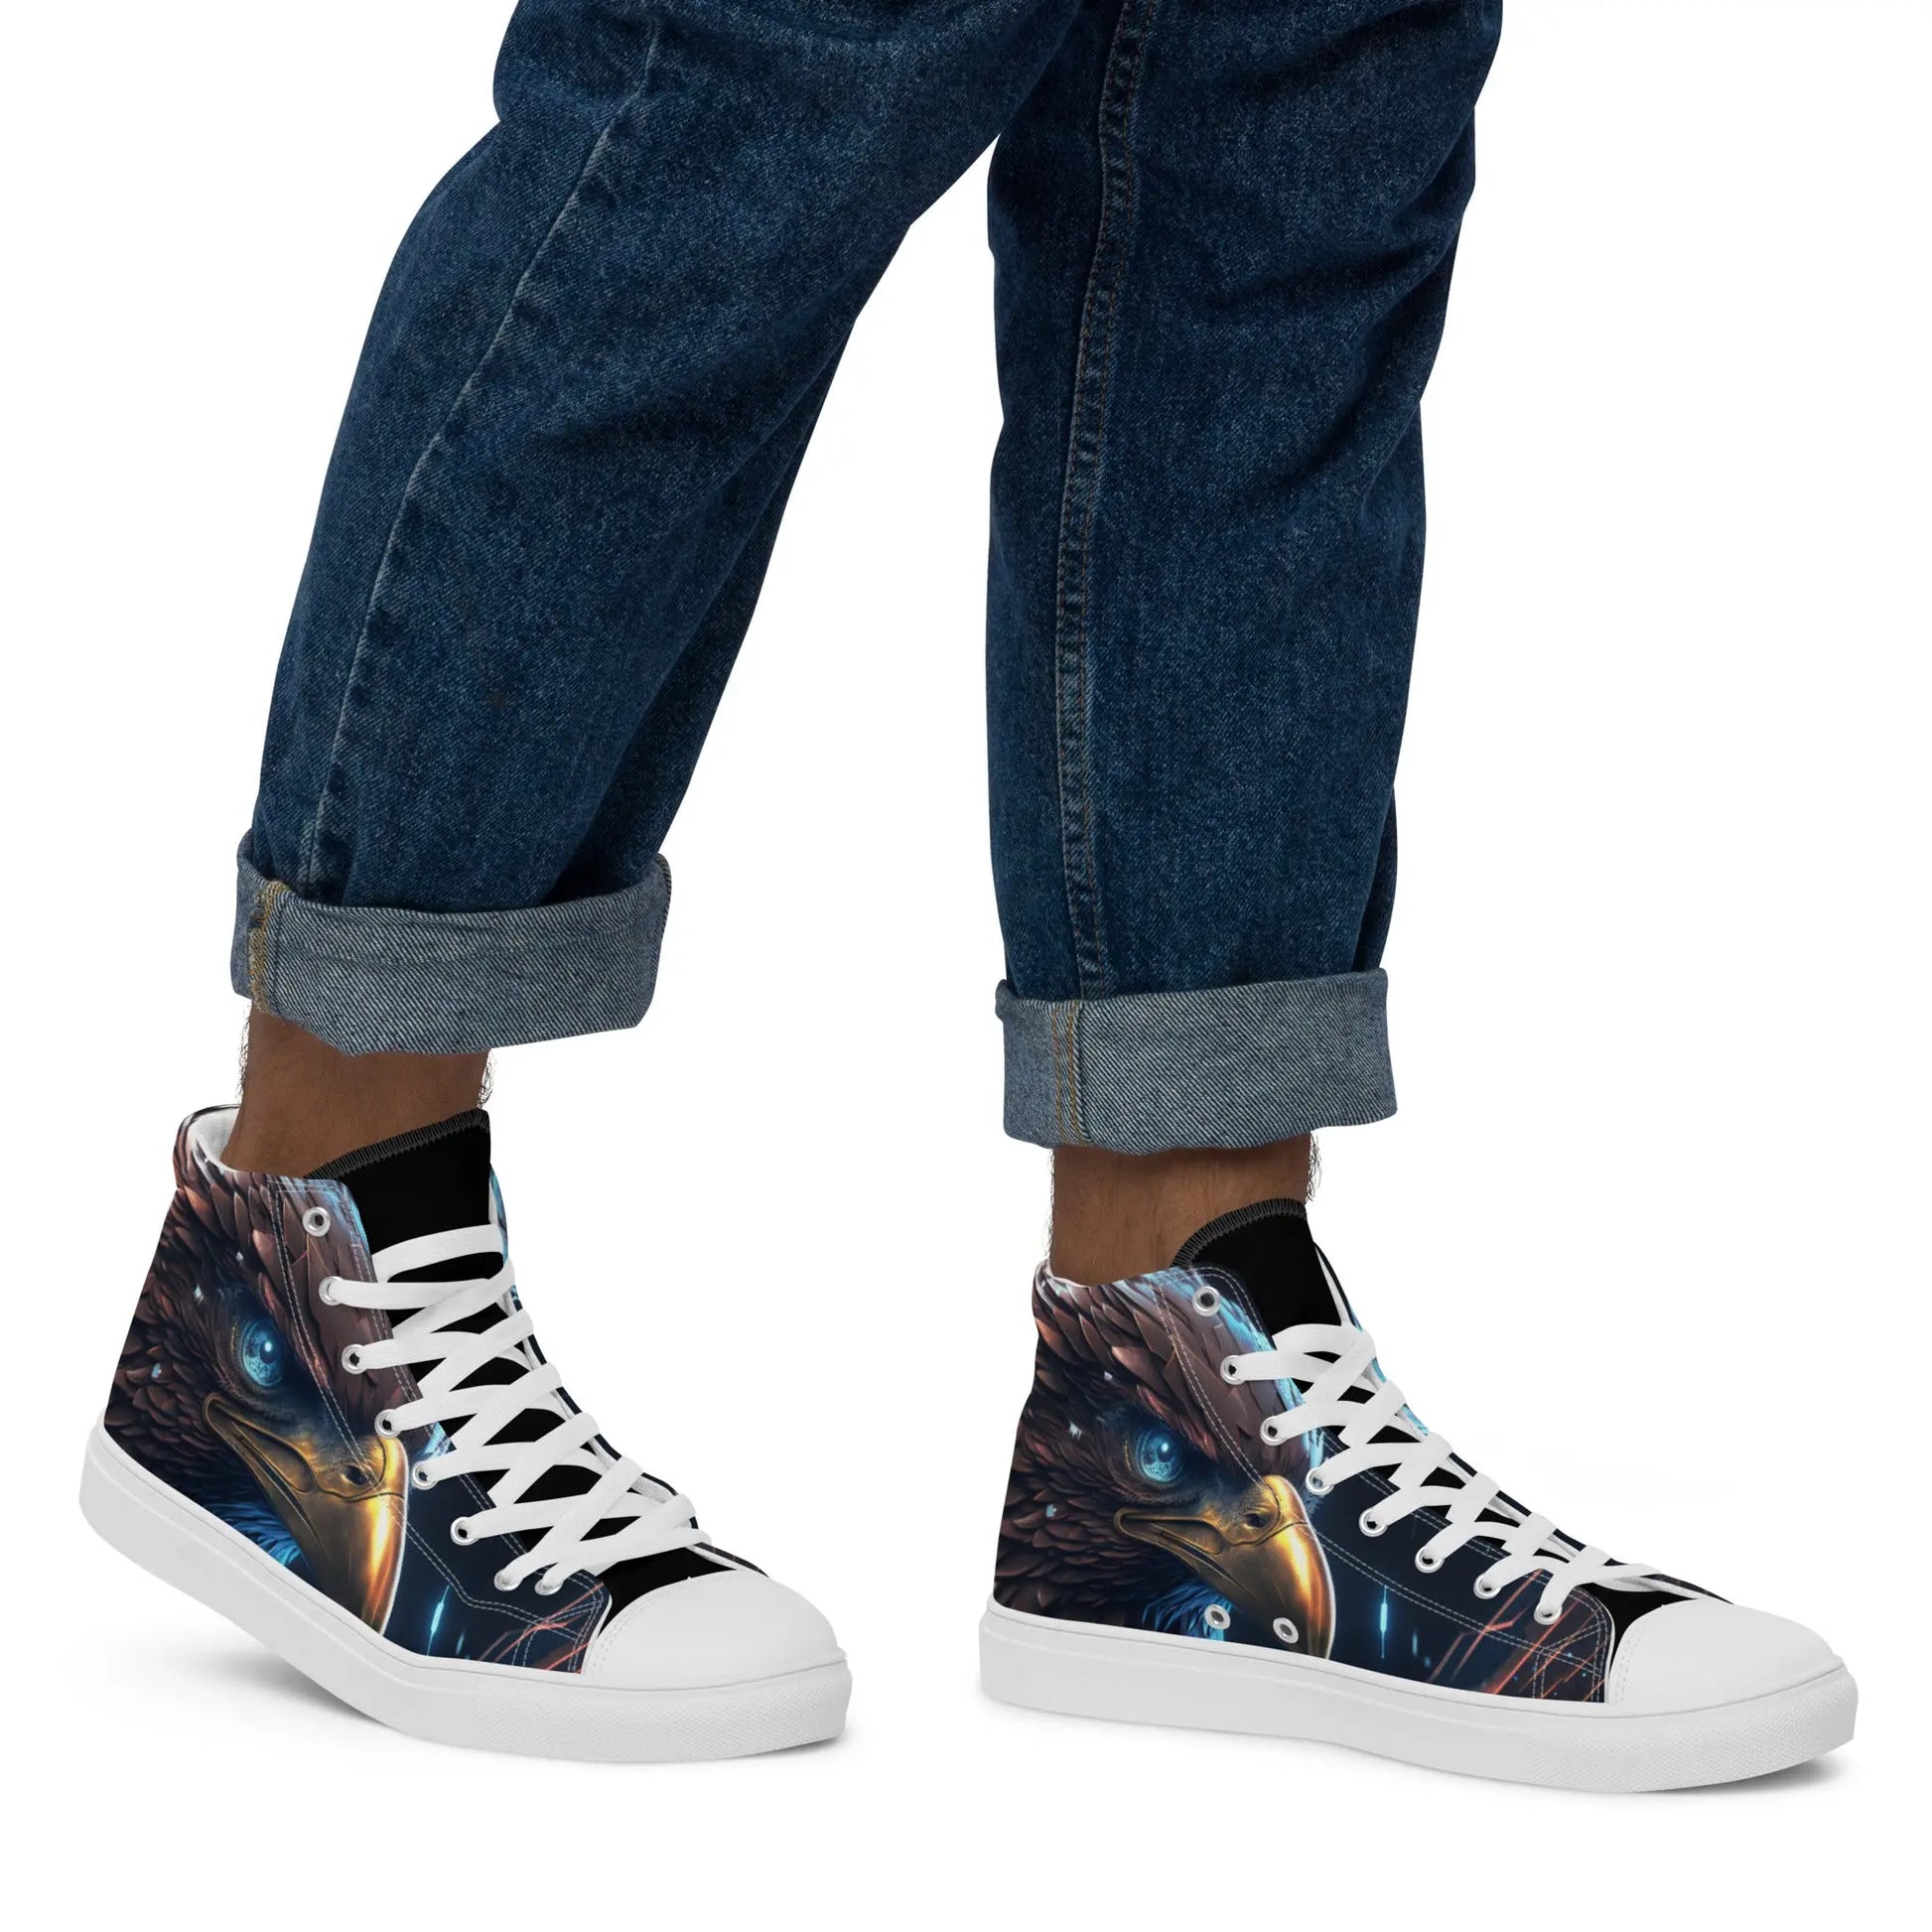 Golden Eagle High Top Sneakers: AI-Engineered, Unisex, Soar Above the Rest with Durable, Comfortable, Bird-Inspired, Animal Print Footwear Kinetic Footwear